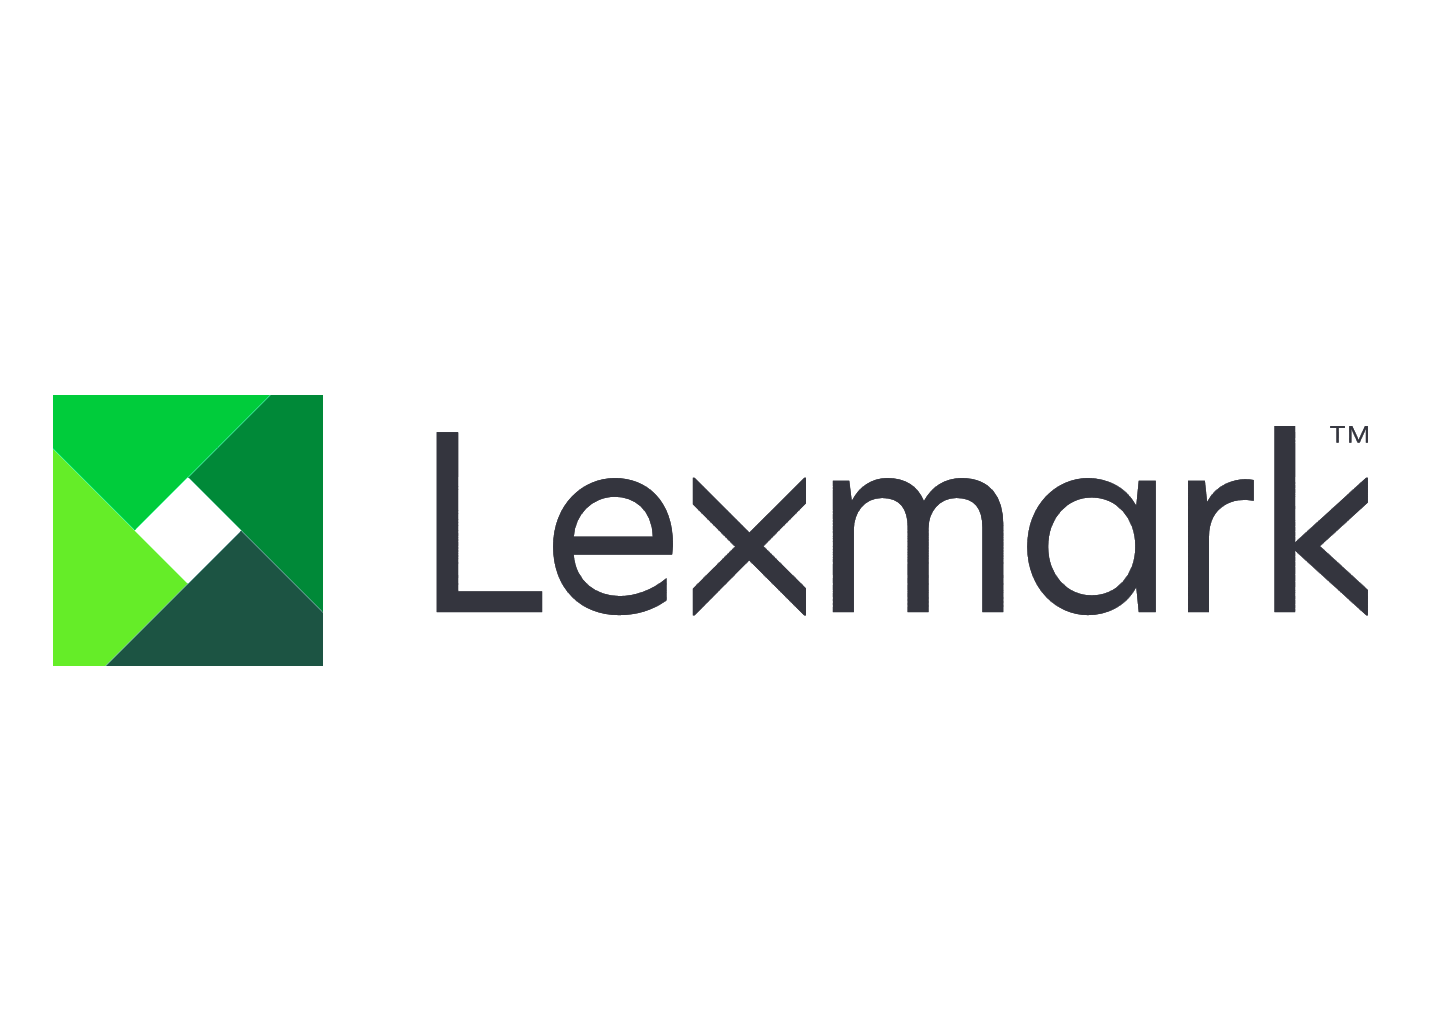 Most Leading European Banks Deployed Lexmark's Solutions 